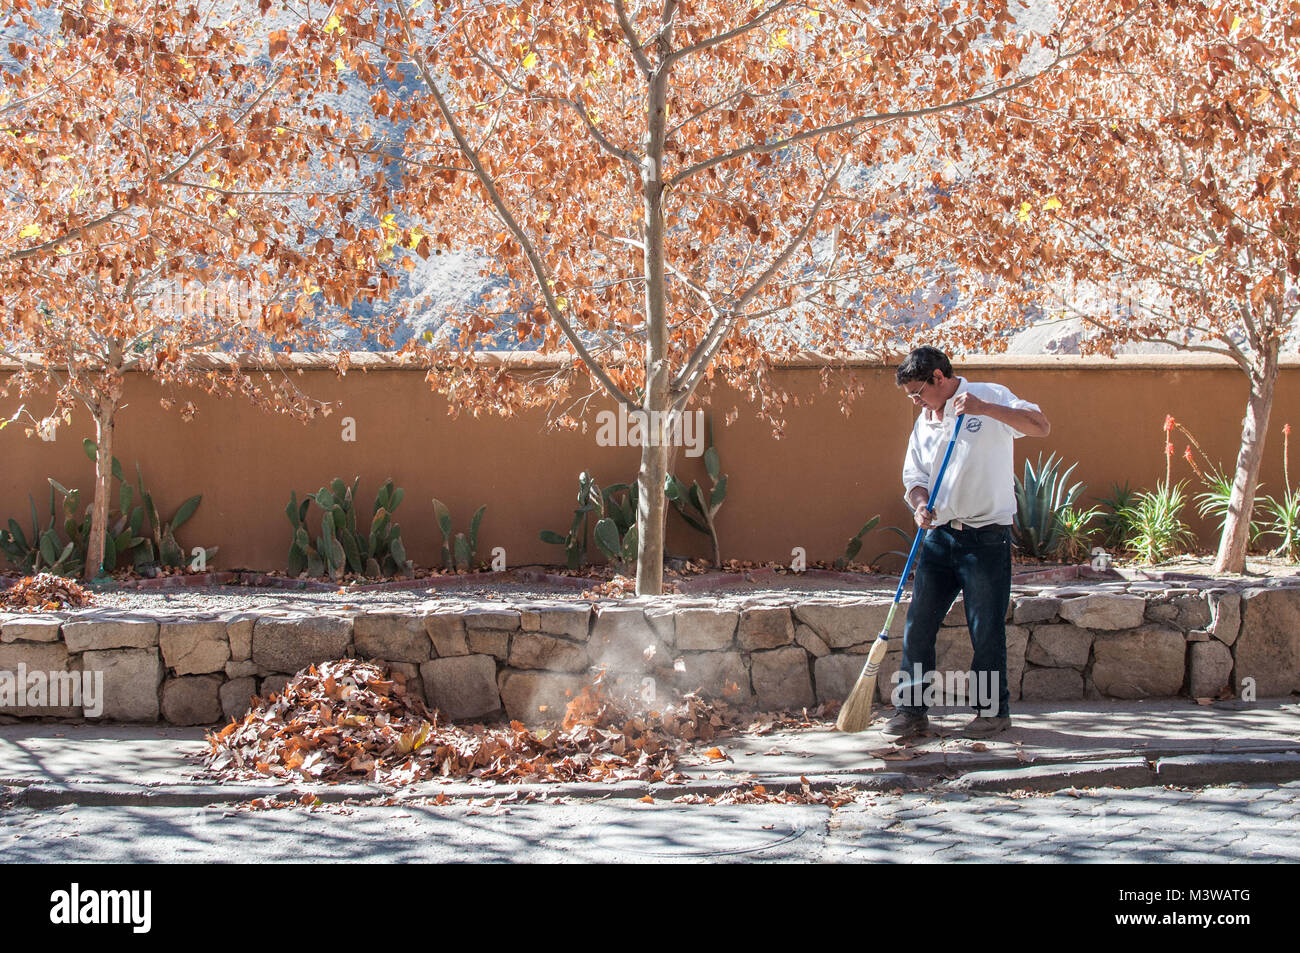 A man sweeping up dead leaves into a pile on the sidewalk in Valle de Elqui, Chile Stock Photo